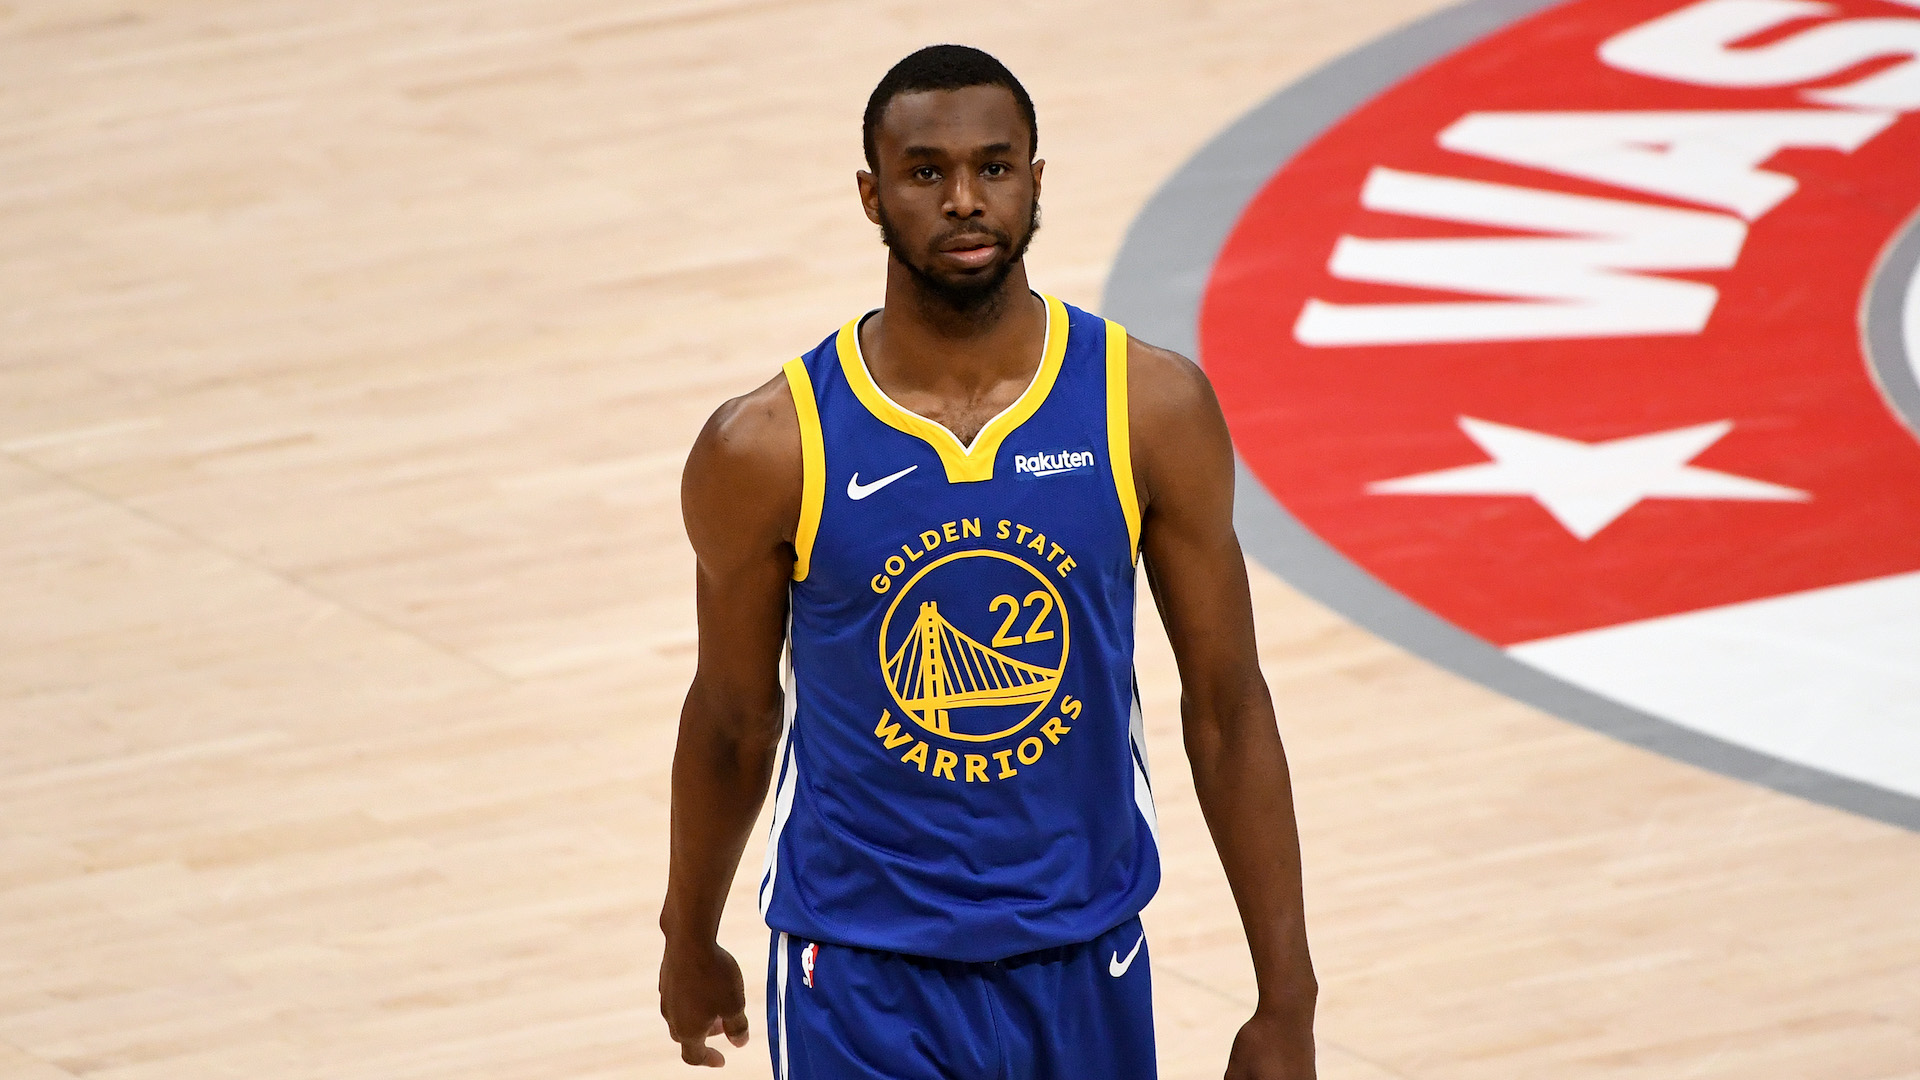 Warriors' Wiggins enters health & safety protocols, out Monday vs